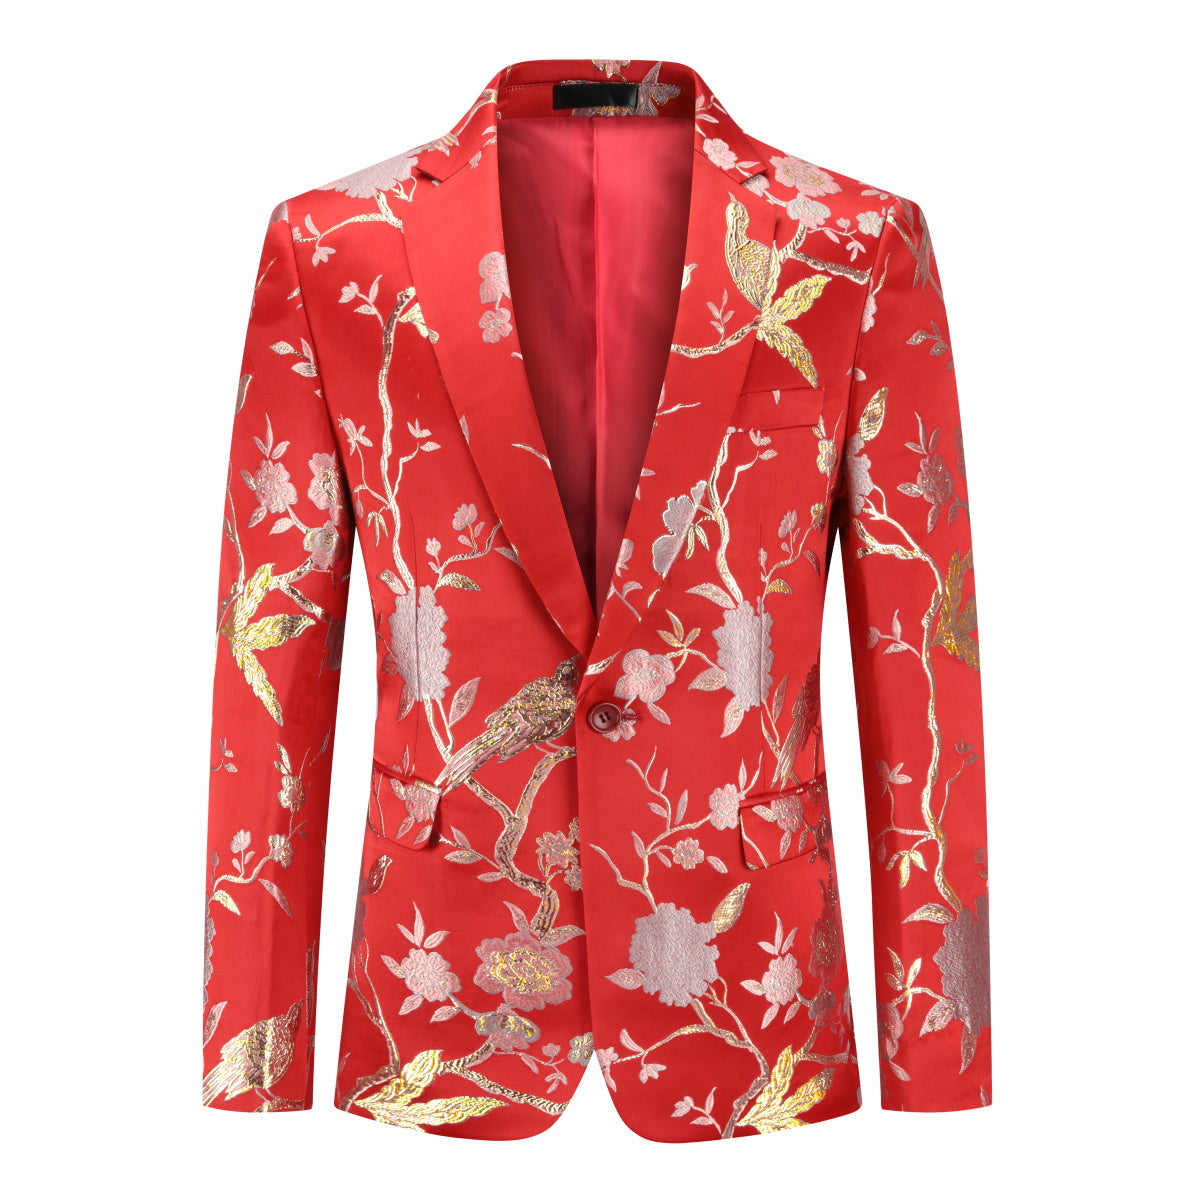 Men's One Button Notched Lapel Embroidered Blazer Red